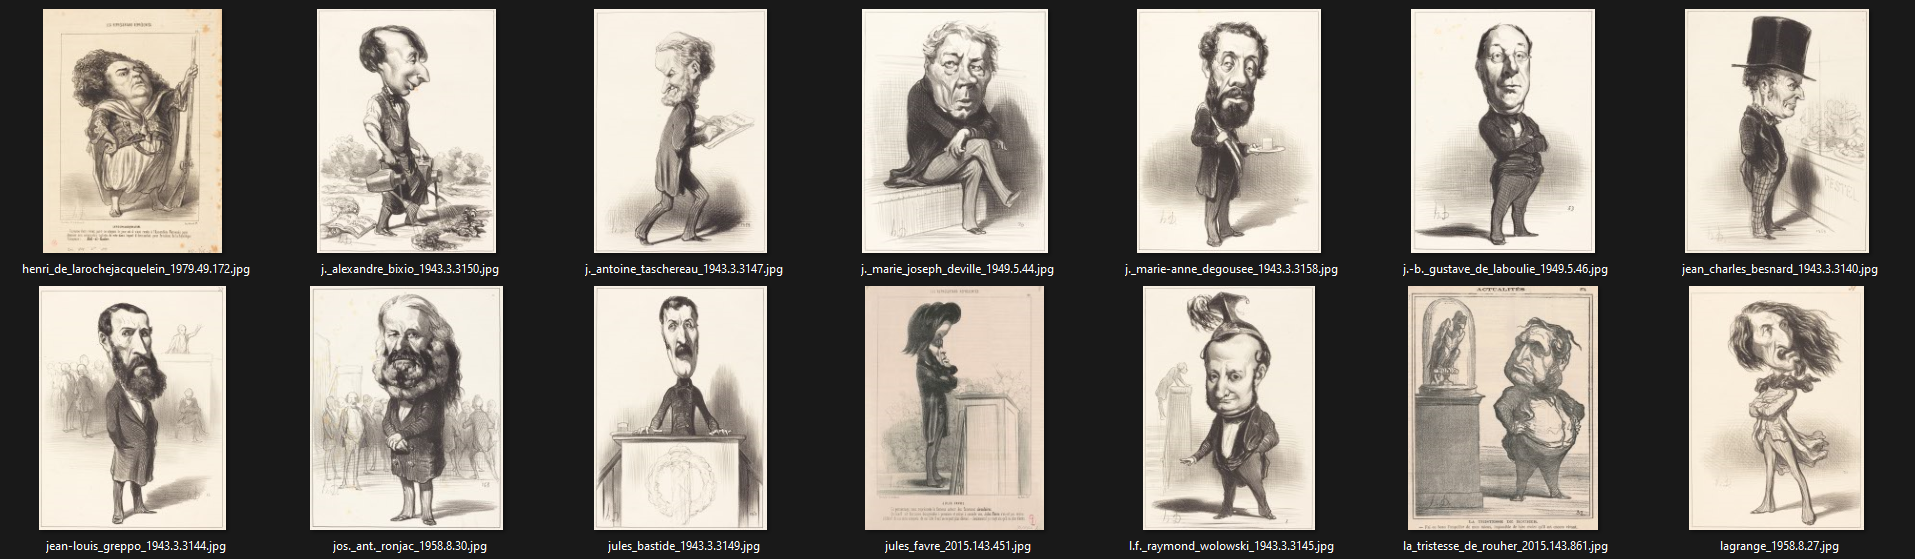 A screenshot of a dataset containing images by Honoré Daumier